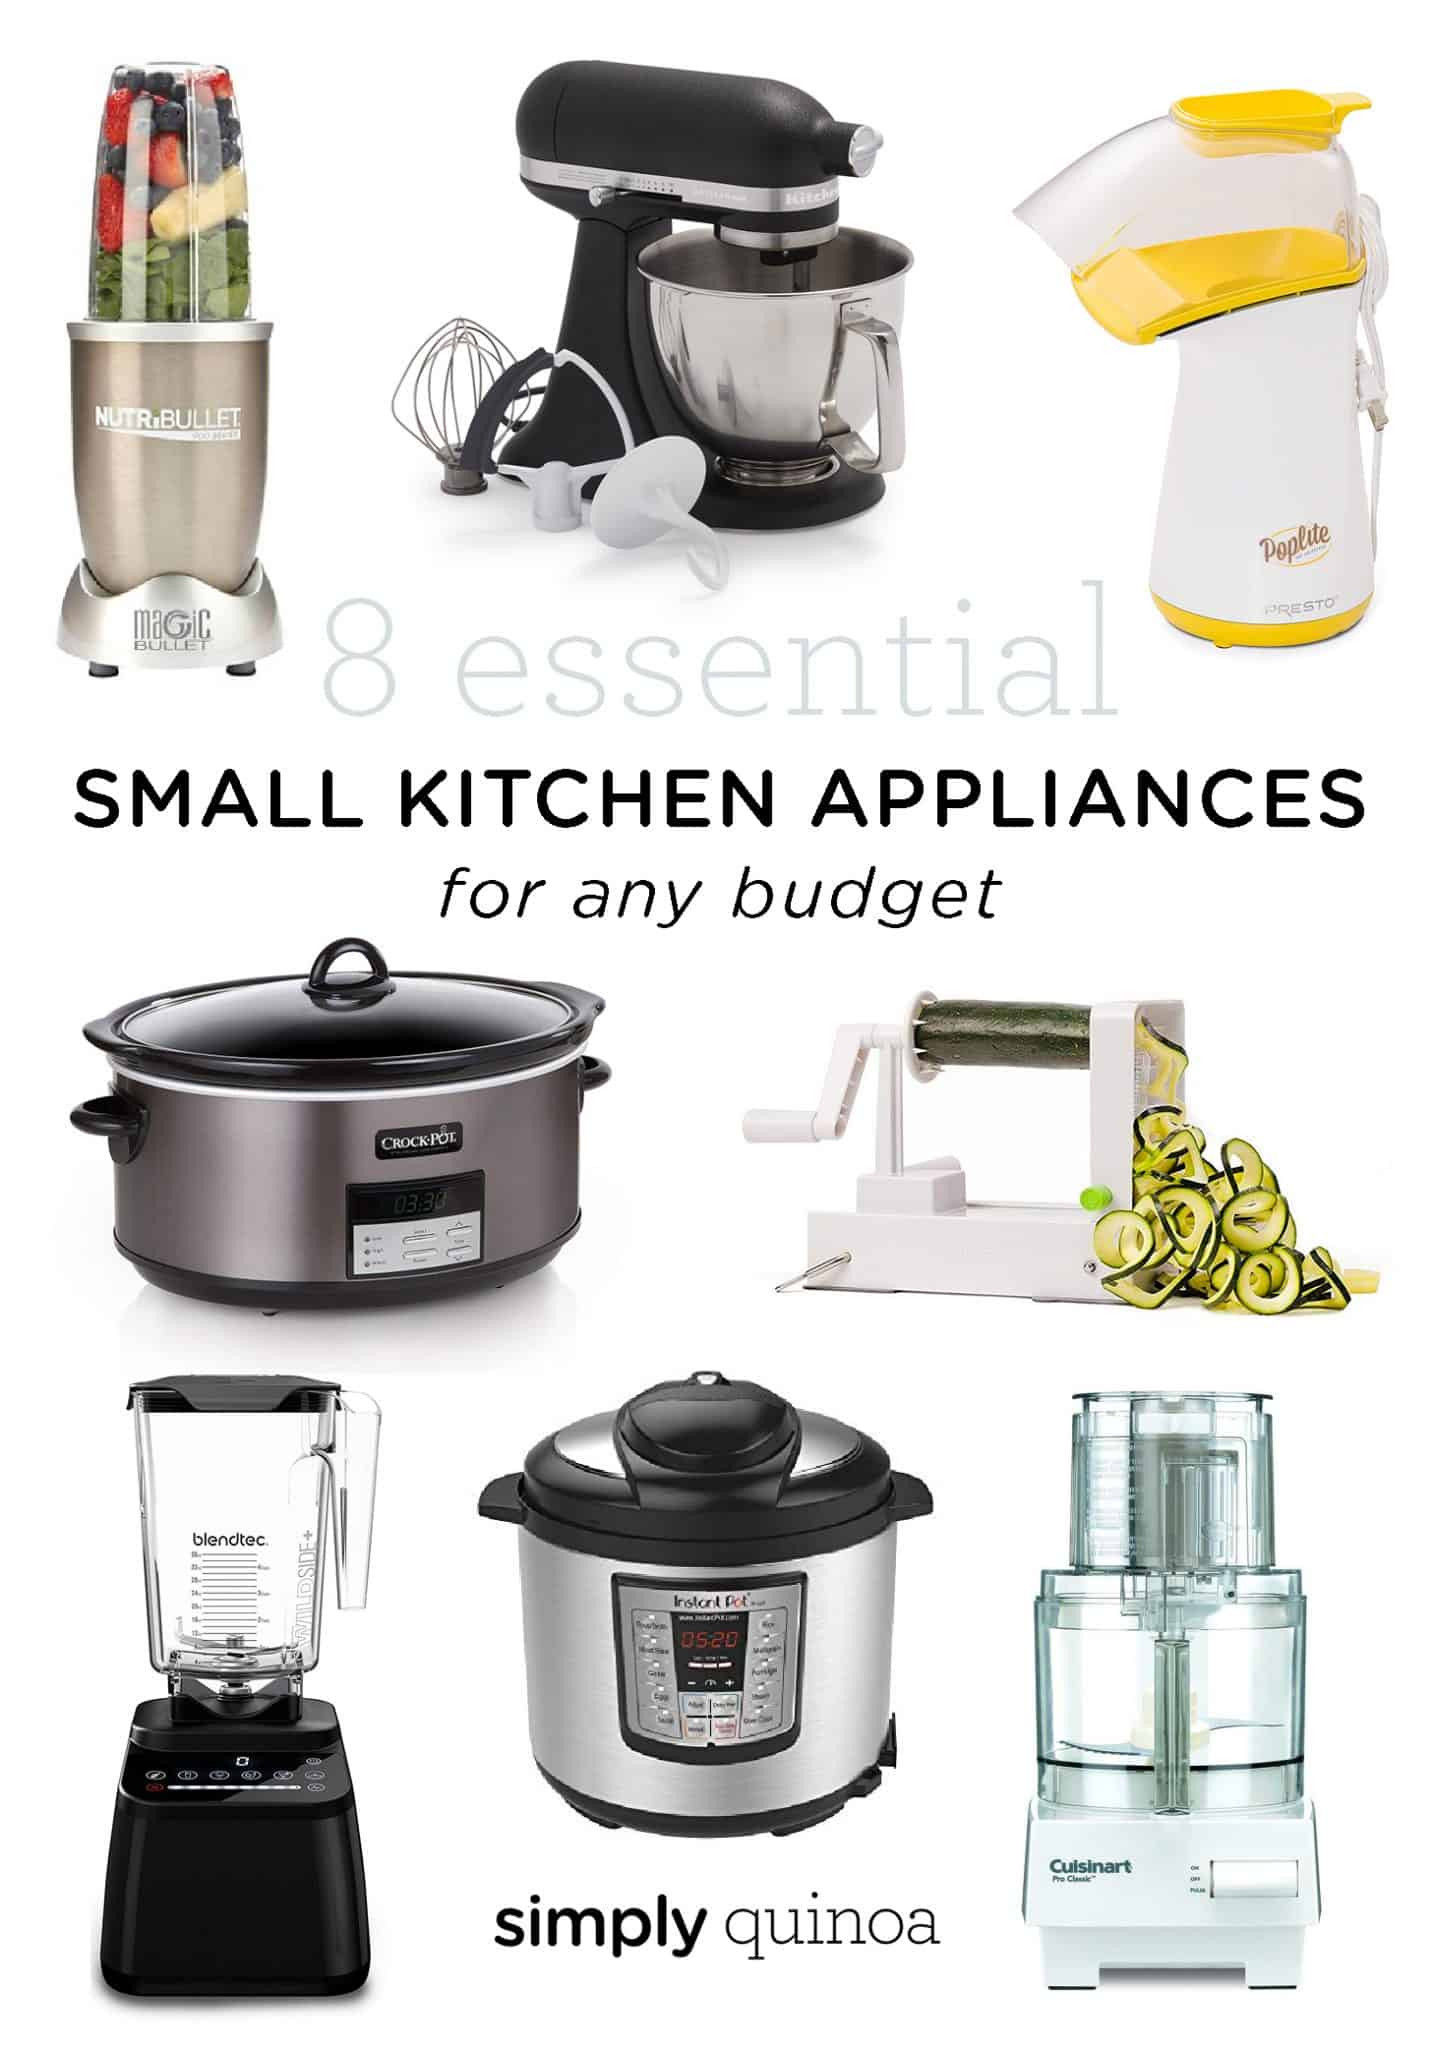 Small Kitchen Refrigerator
 8 Essential Small Kitchen Appliances for Any Bud